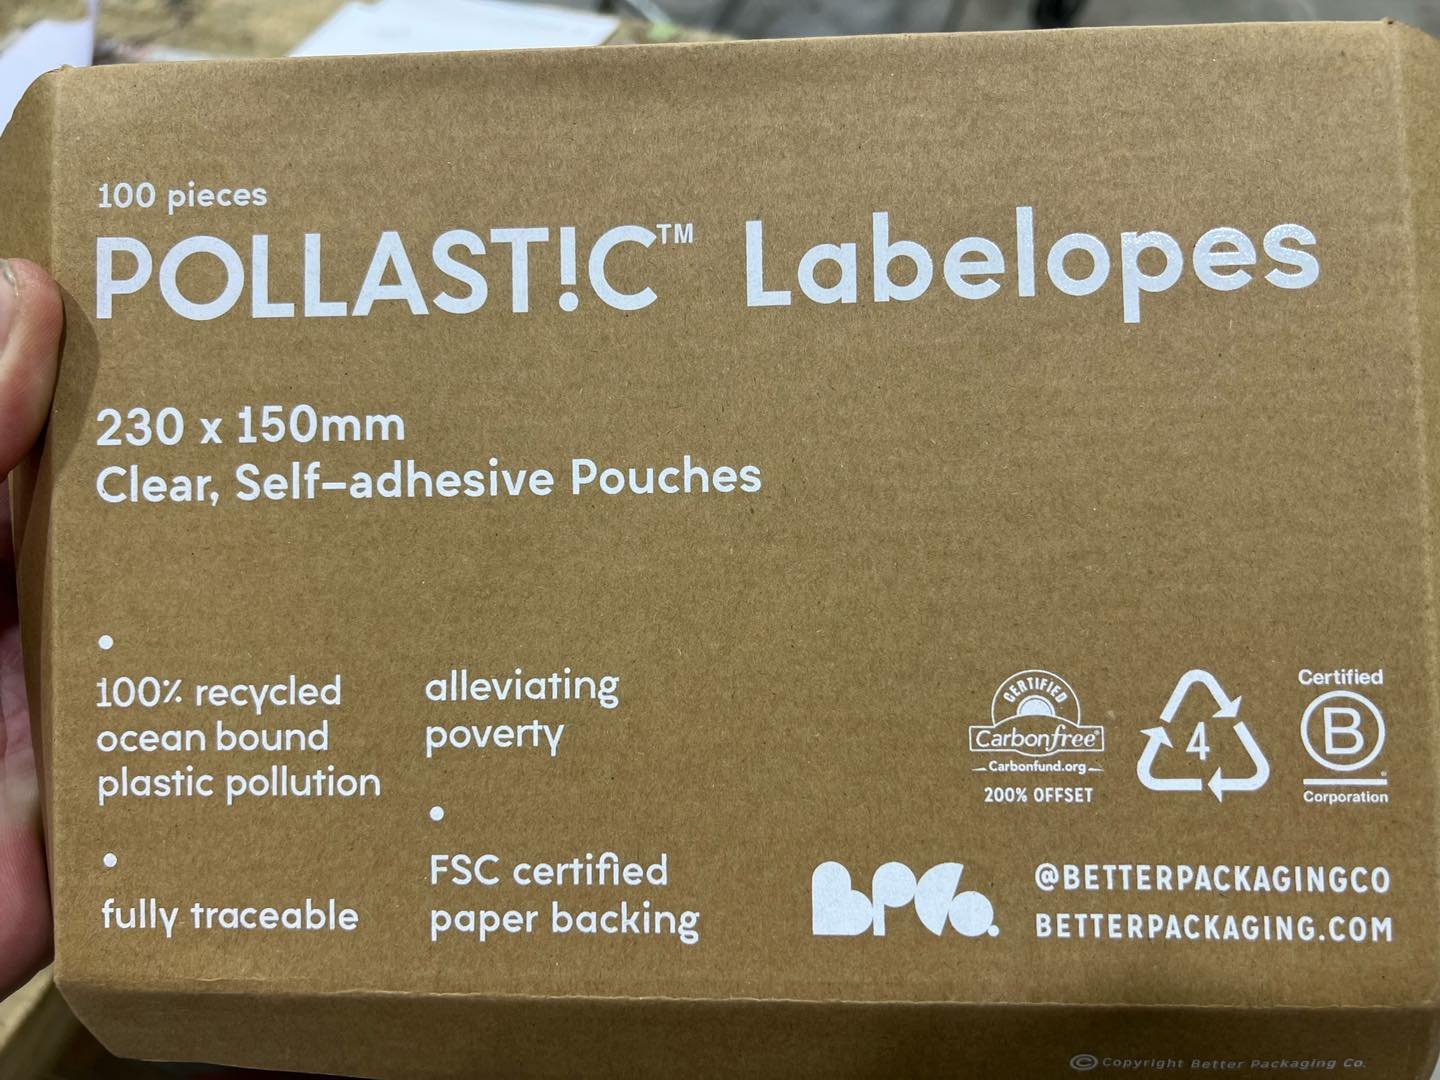 Check this out bros! We found these awesome new environmentally friendly Pollastic Labelopes and we LOVE them! Better Packaging Co thanks for minimizing the soft plastic that goes into our oceans!